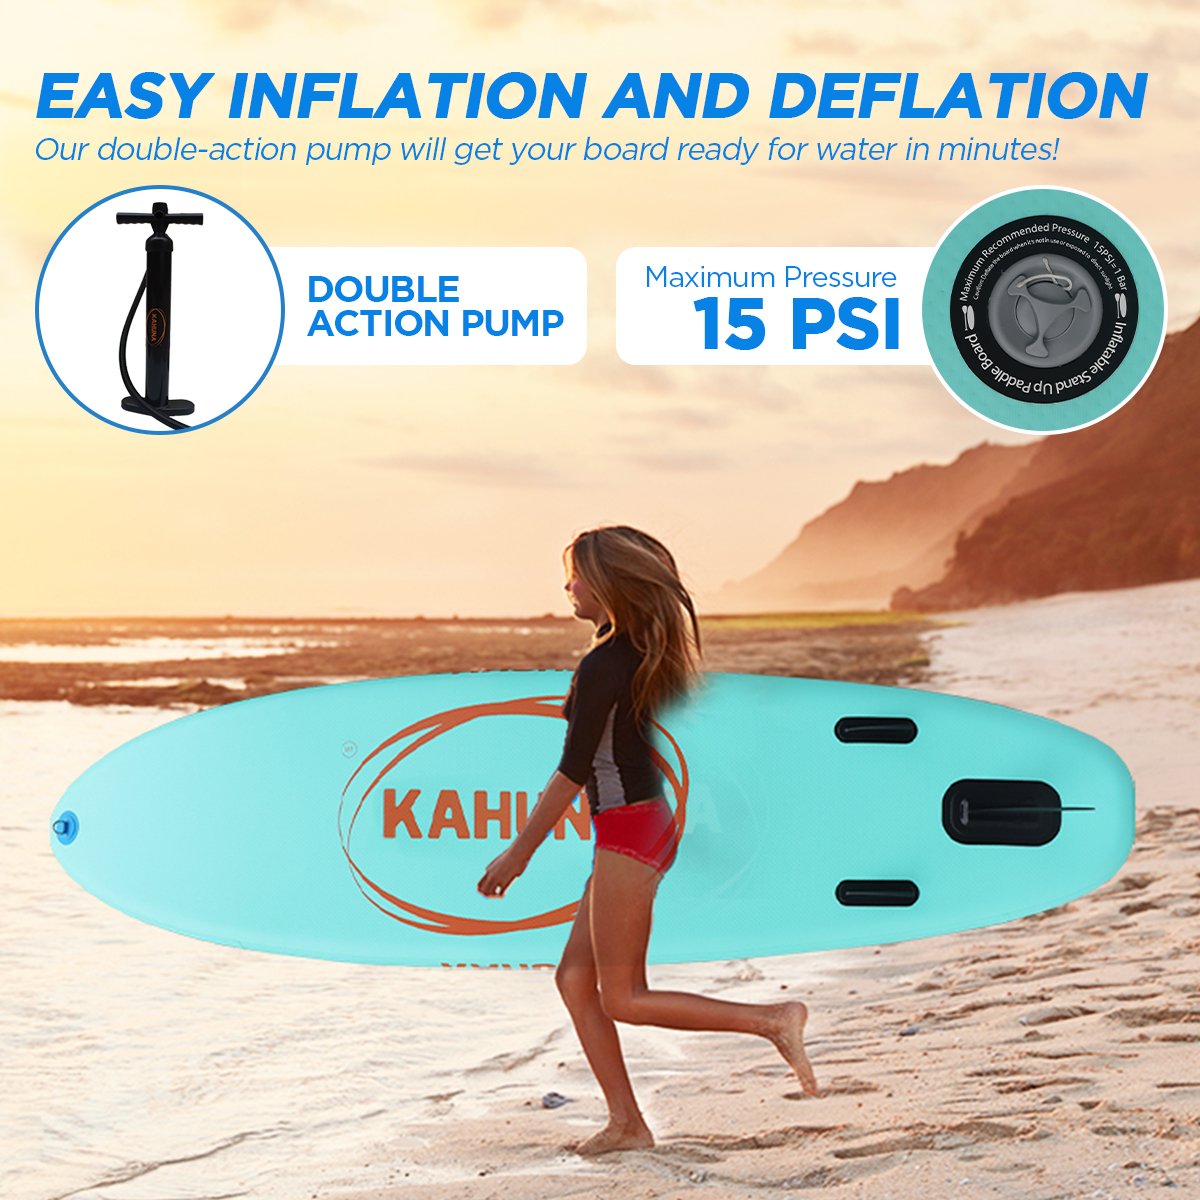 Kahuna Hana Inflatable Stand Up Paddle Board 10ft6in iSUP Accessories - SILBERSHELL